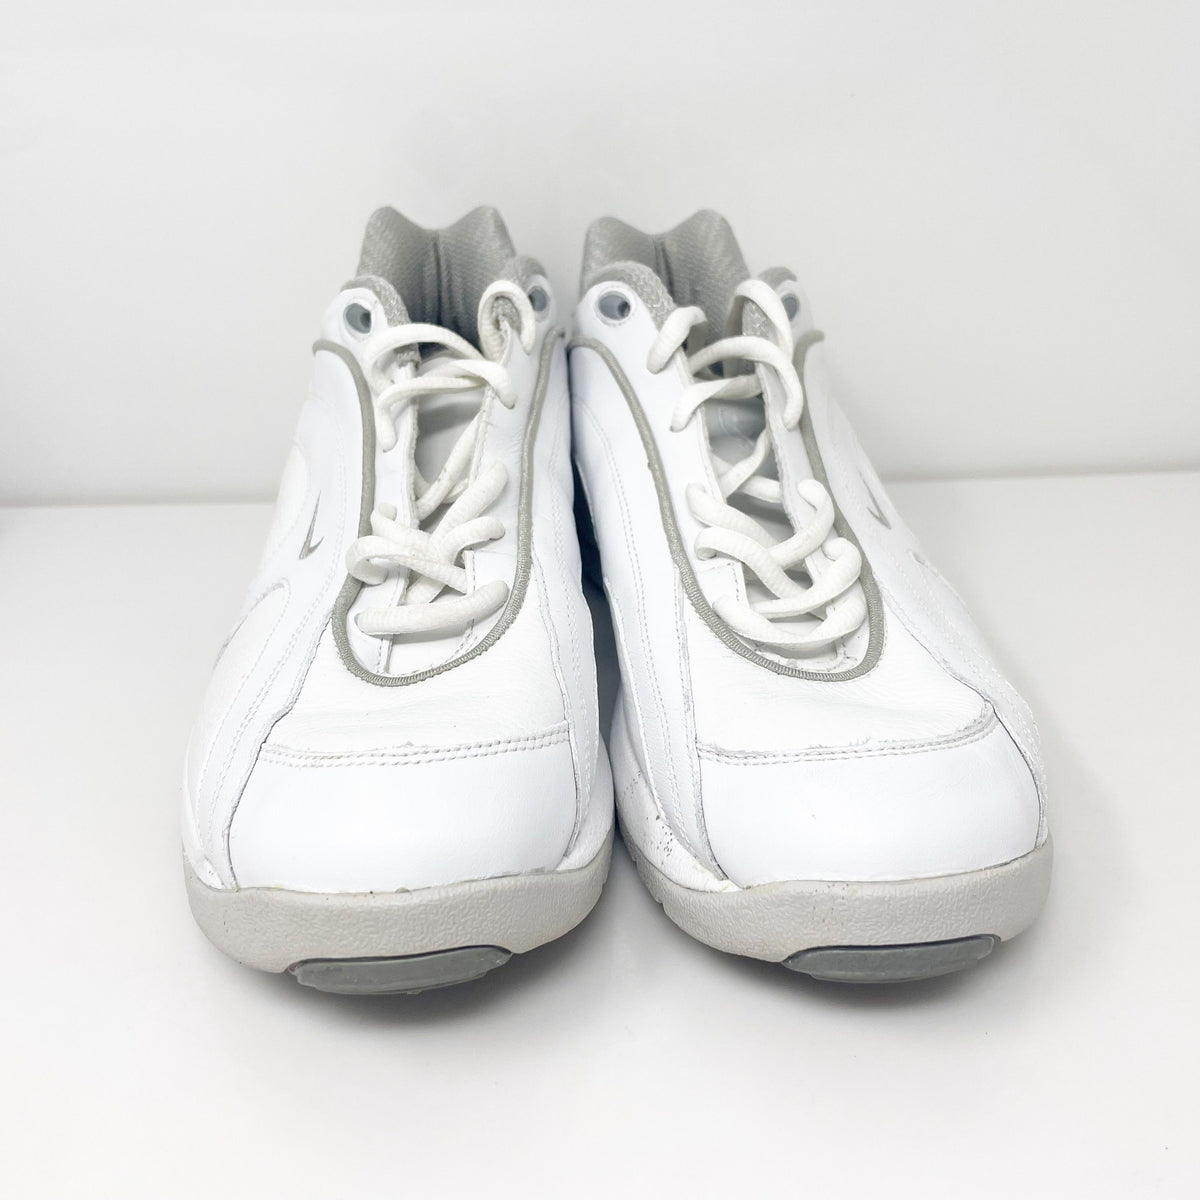 Nike Womens Air Edge 192099 101 White Golf Cleats Shoes Size 8 ...